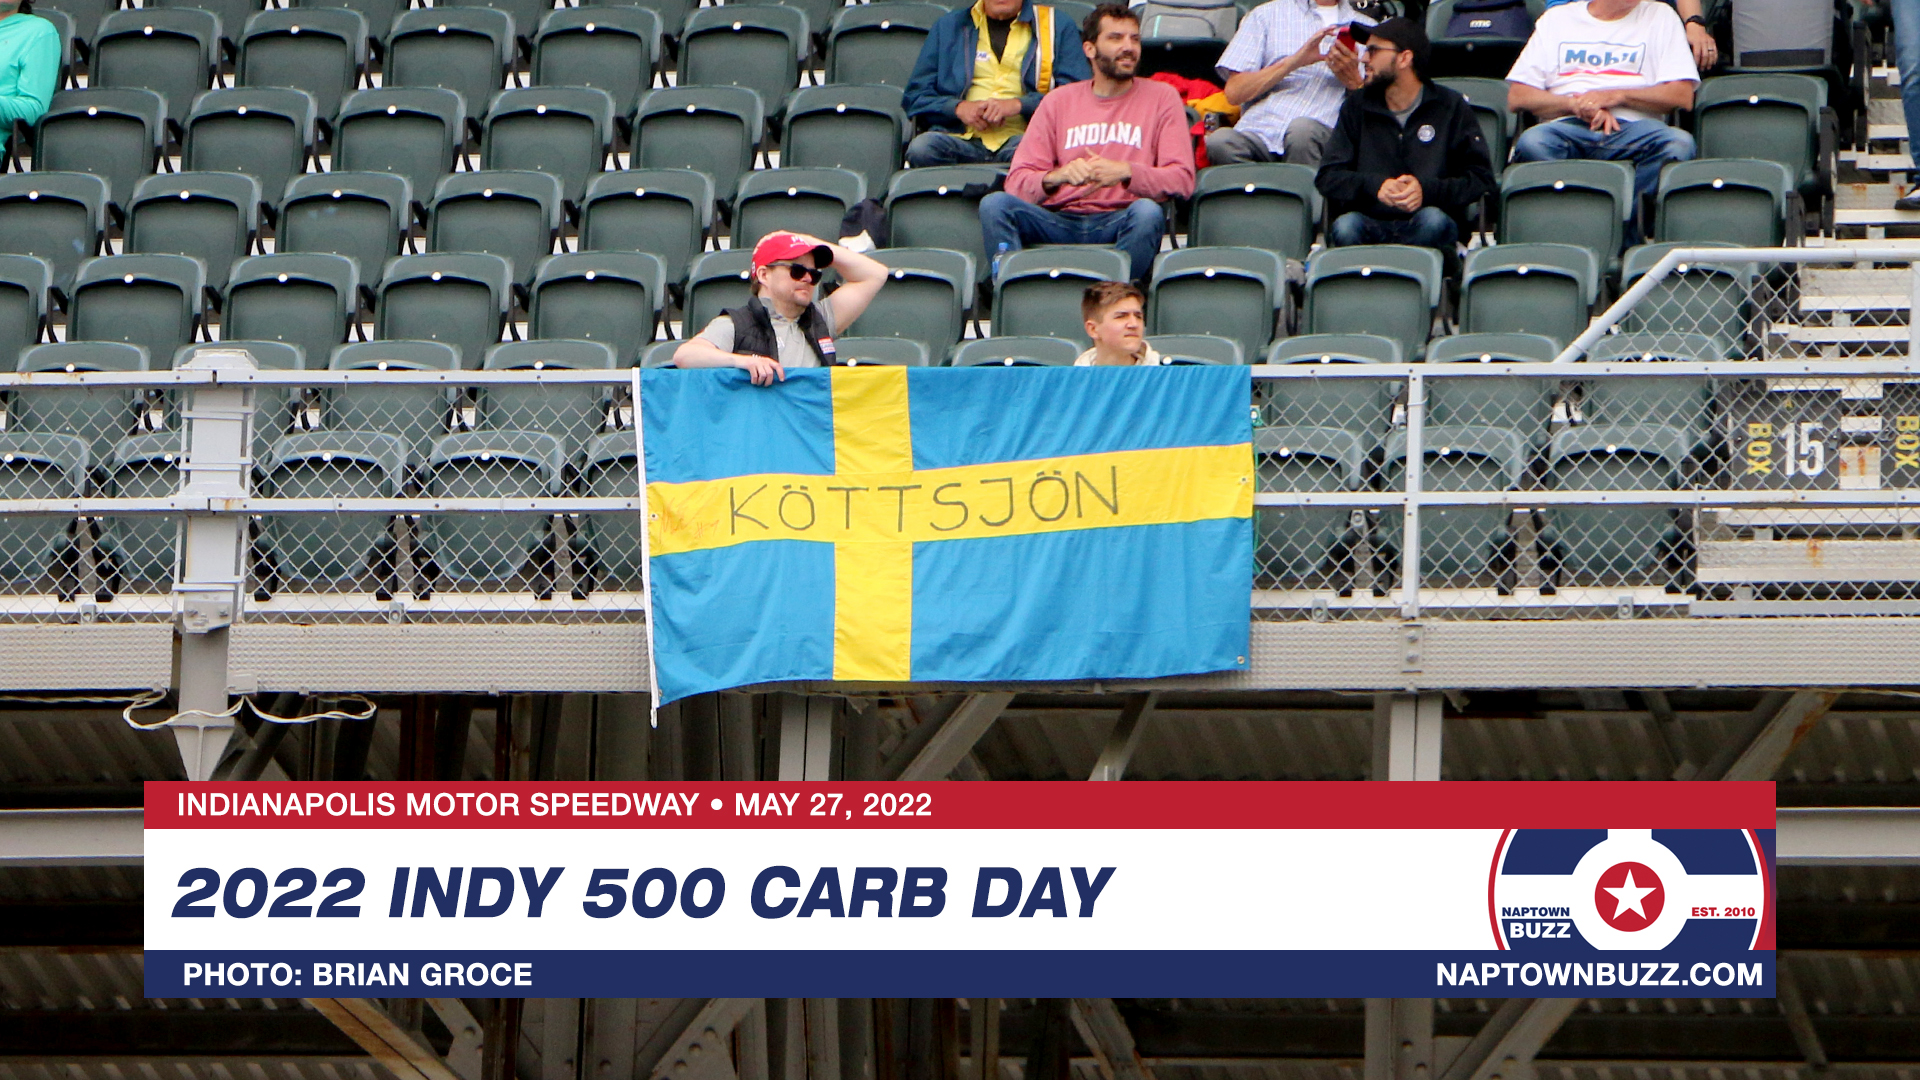 Indy 500 Carb Day May 27, 2022 Fans